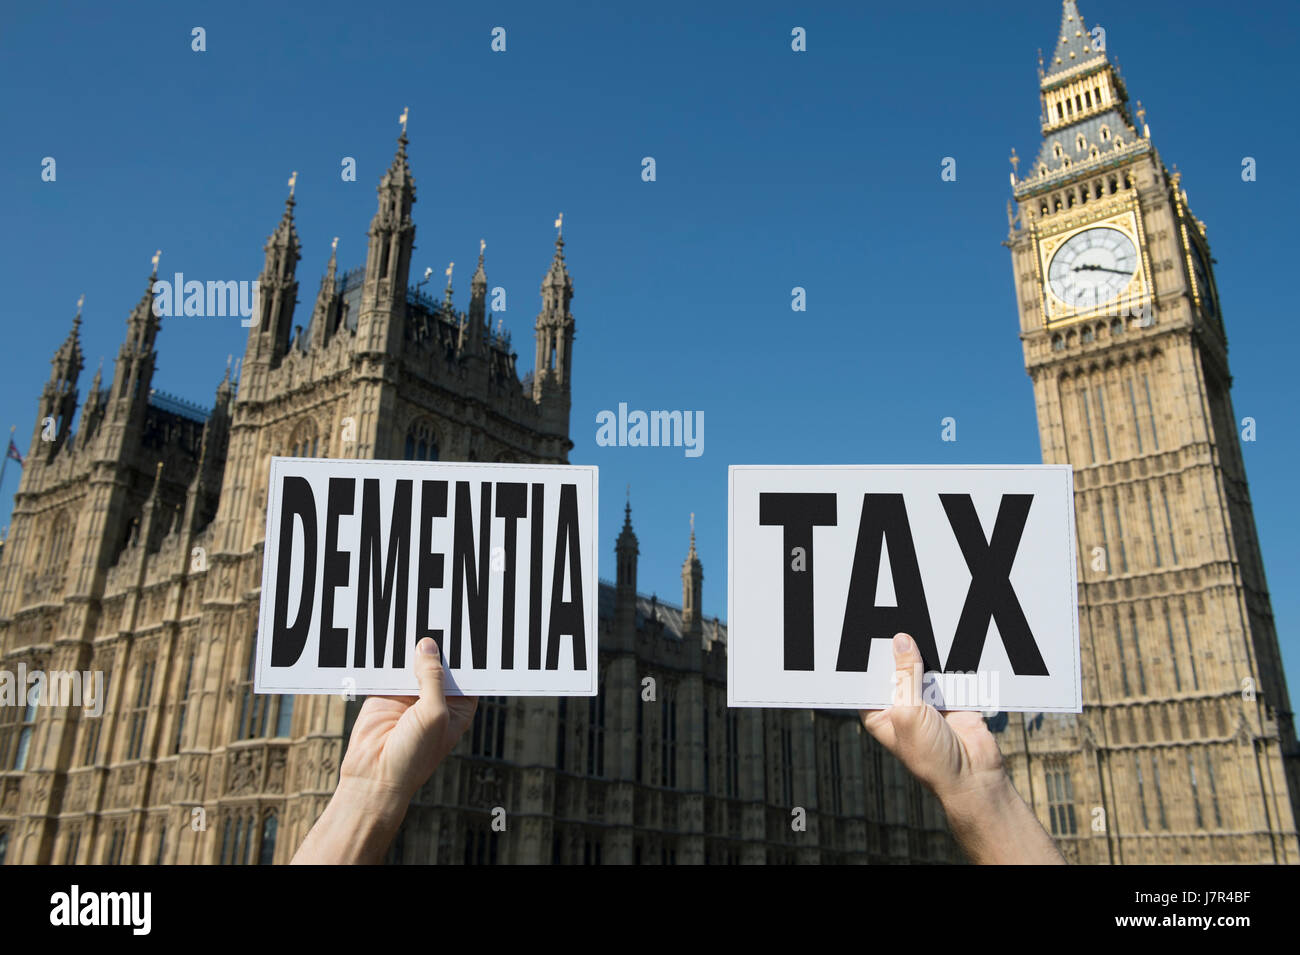 Election signs holding up the hot buttonissue of 'dementia tax' at the government Houses of Parliament at Westminster Palace in London, UK Stock Photo